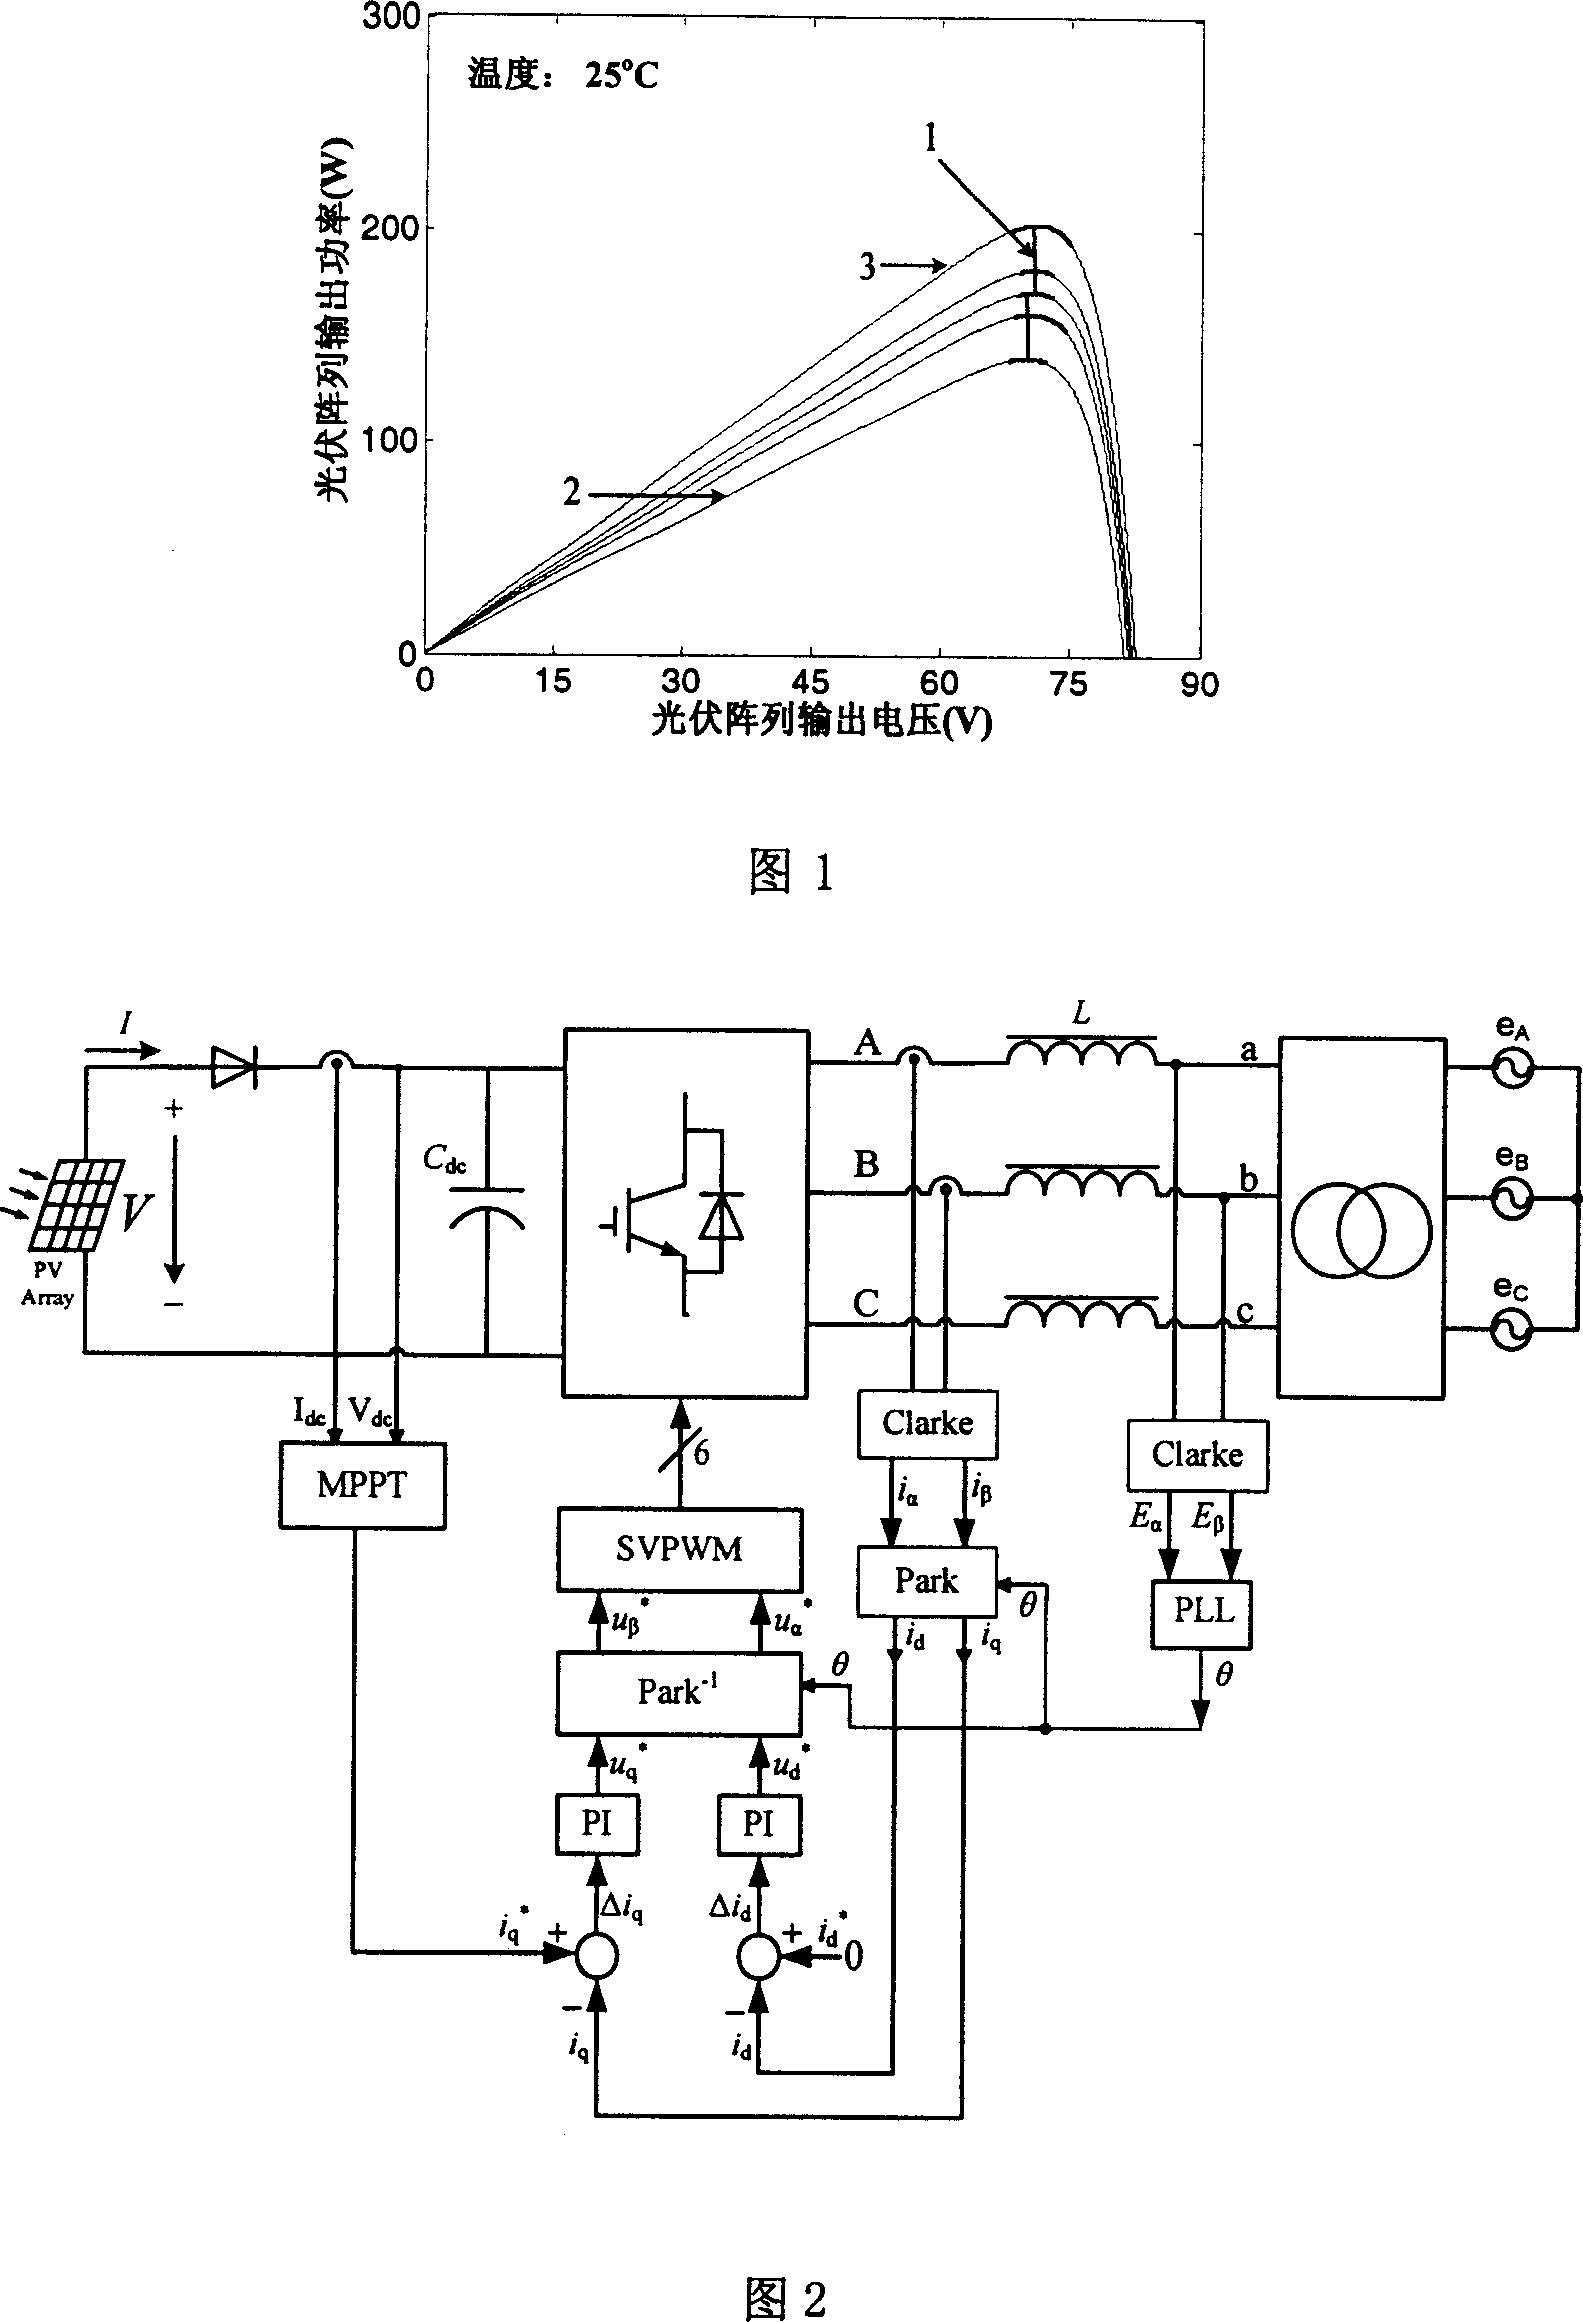 Photovoltaic three-phase grid control method for fast and steadily implementing maximal power tracing